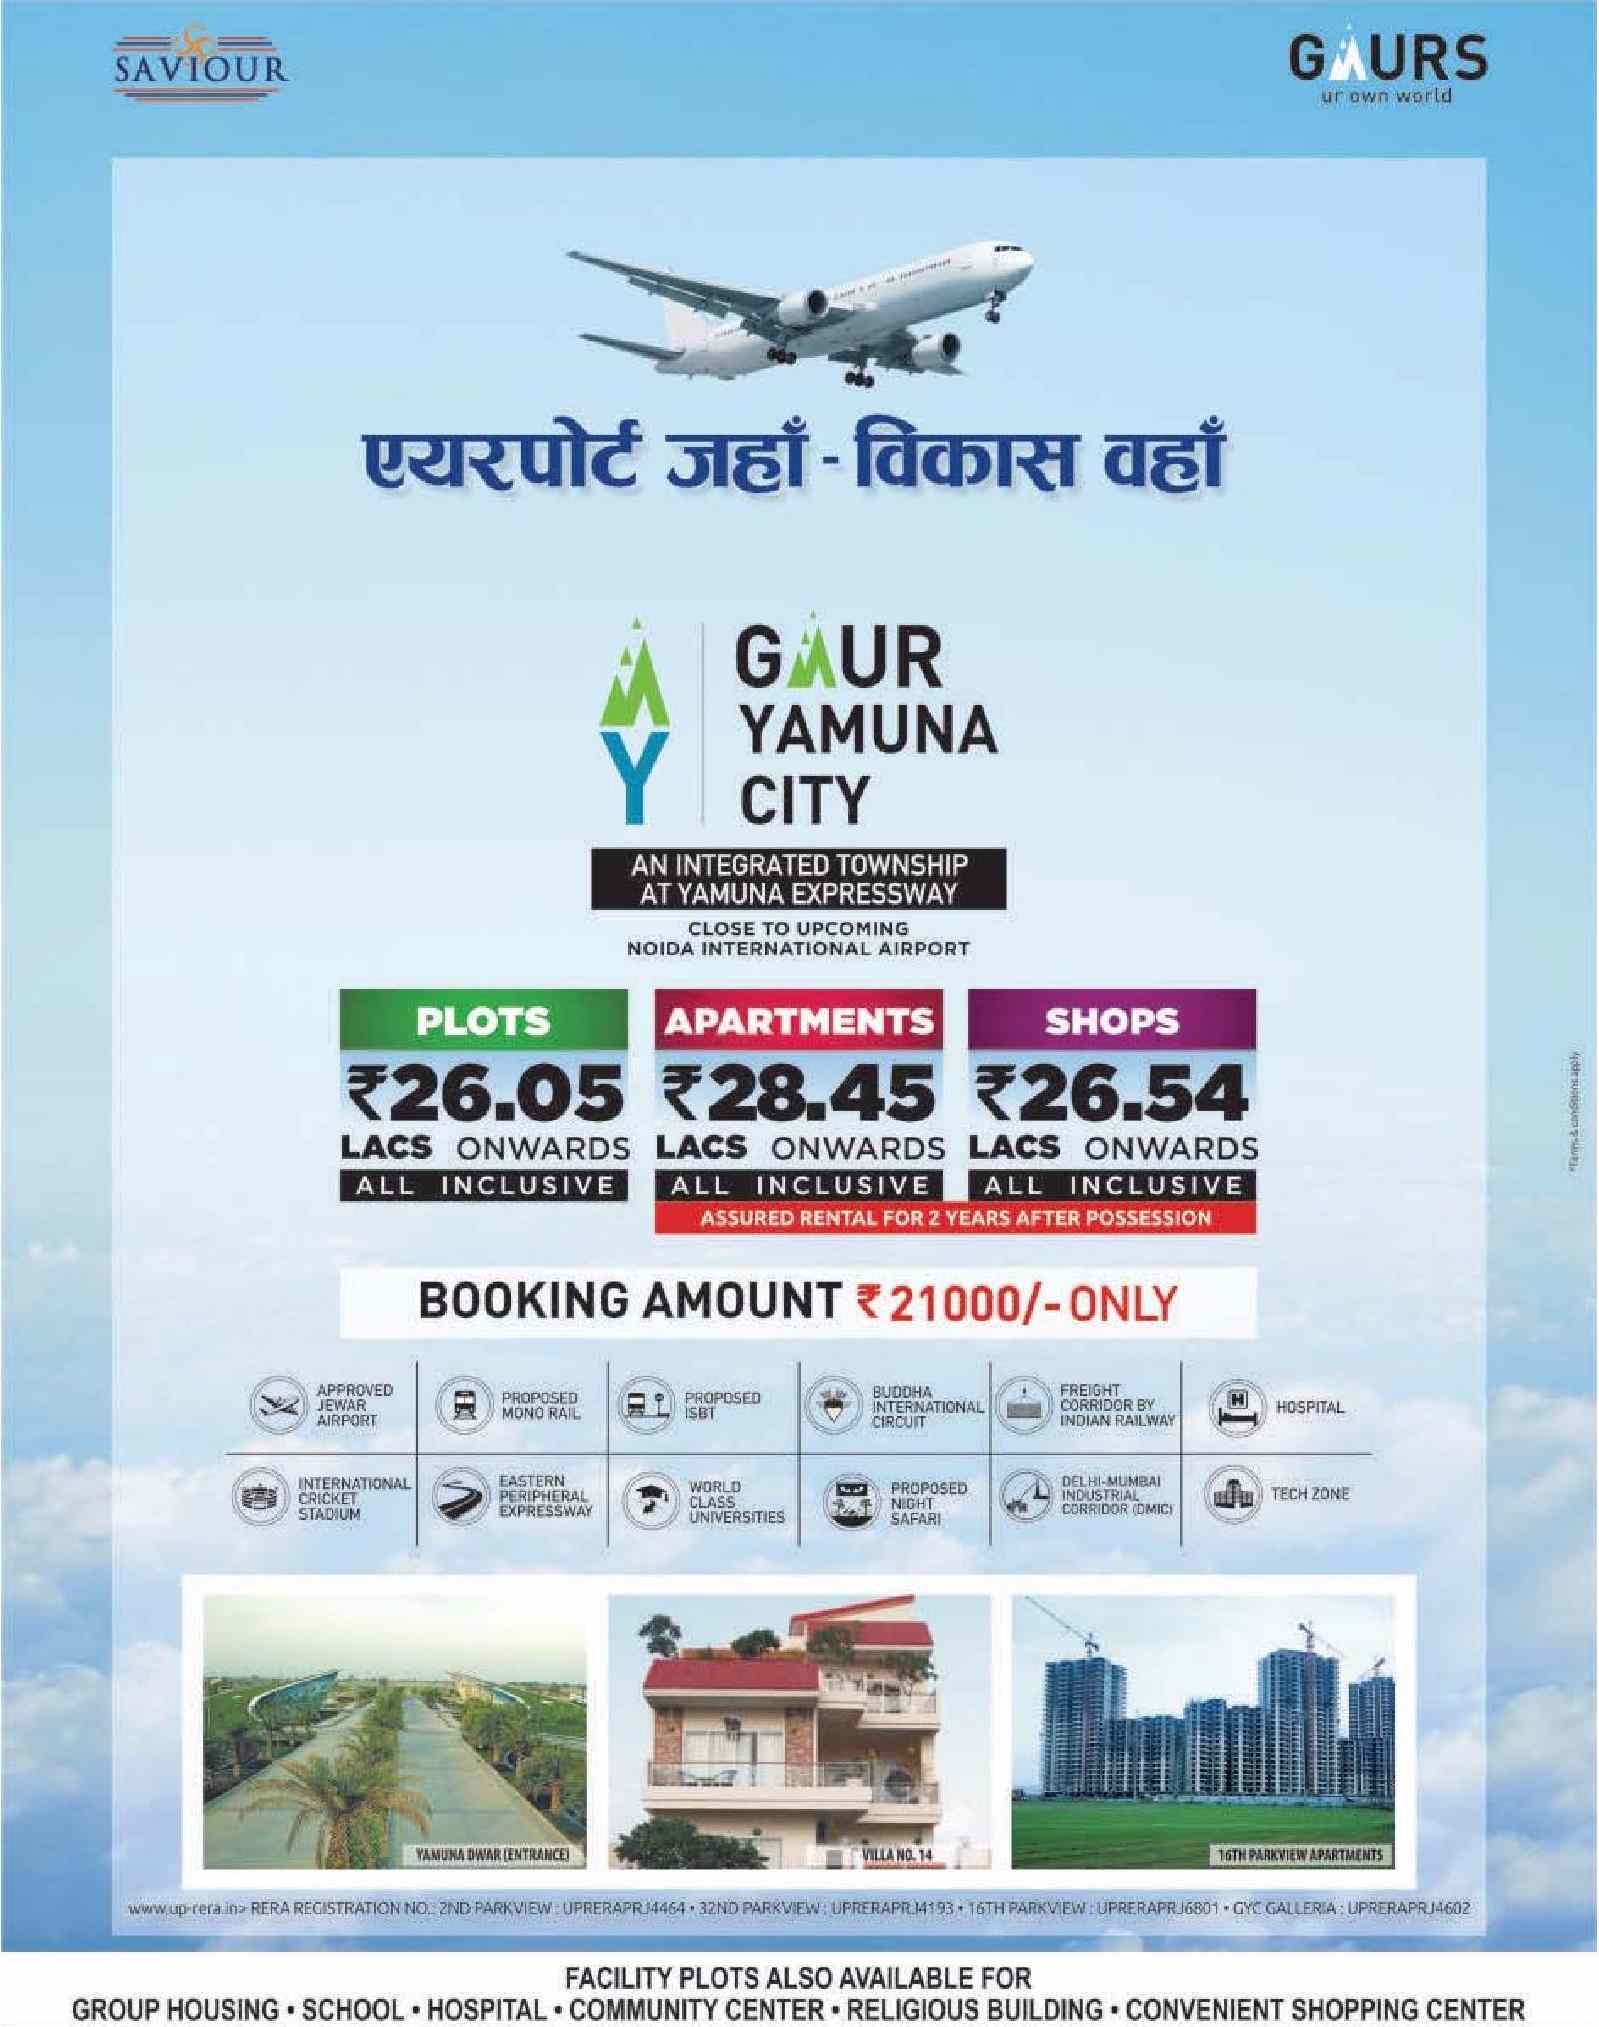 Live in an integrated township at Gaur Yamuna City in Greater Noida Update